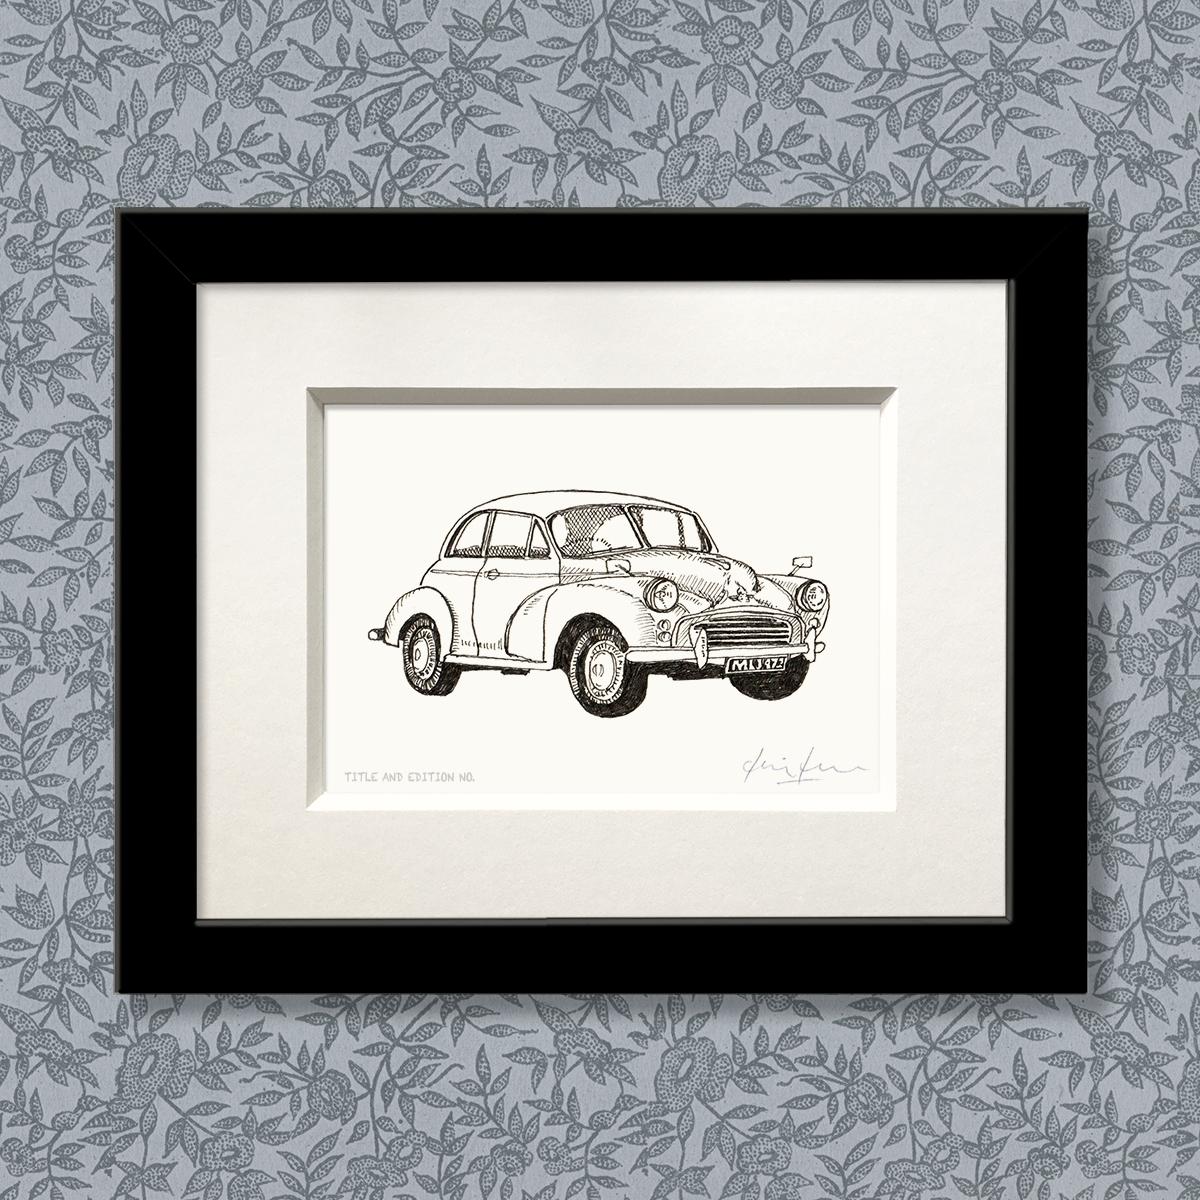 Limited edition print from pen and ink drawing of a Morris Minor in a black frame